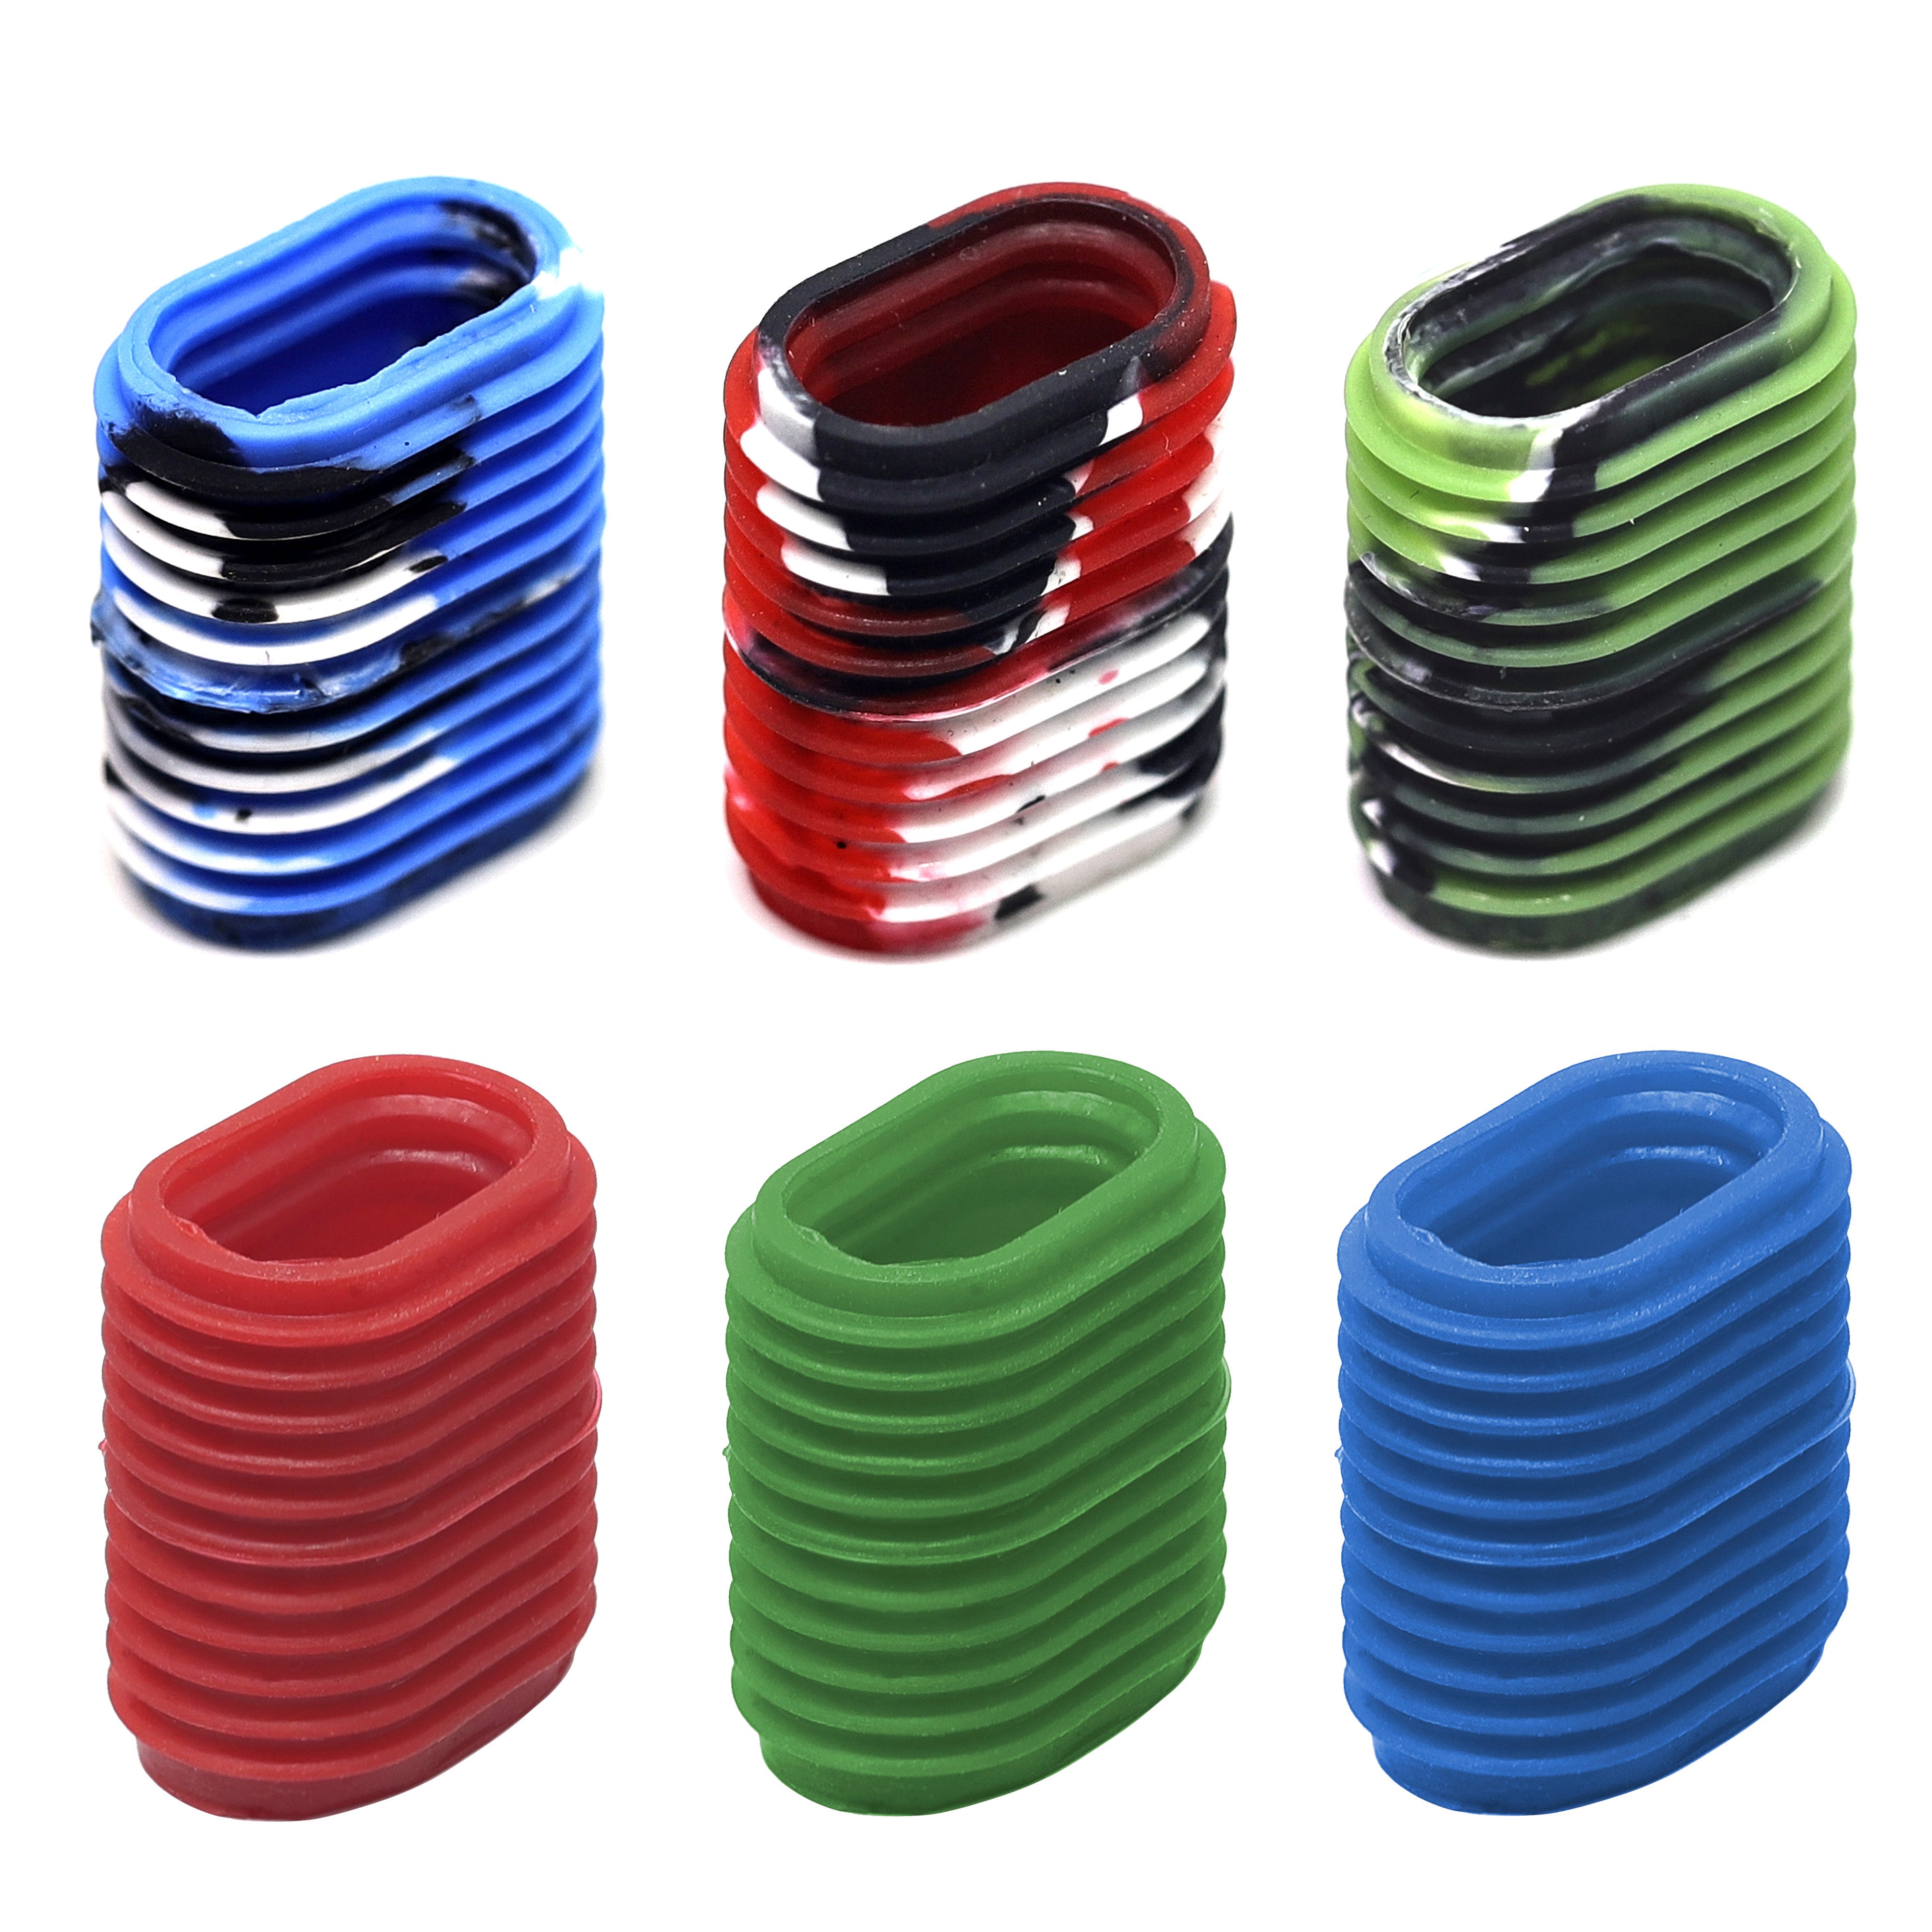  Leo 10pcs Rubber Fishing Reel Handle Grip Cover Non-Slip  Baitcaster Knob Sleeve 5 Pairs in Pack 5 Colors (5 Mix Colors) : Sports &  Outdoors